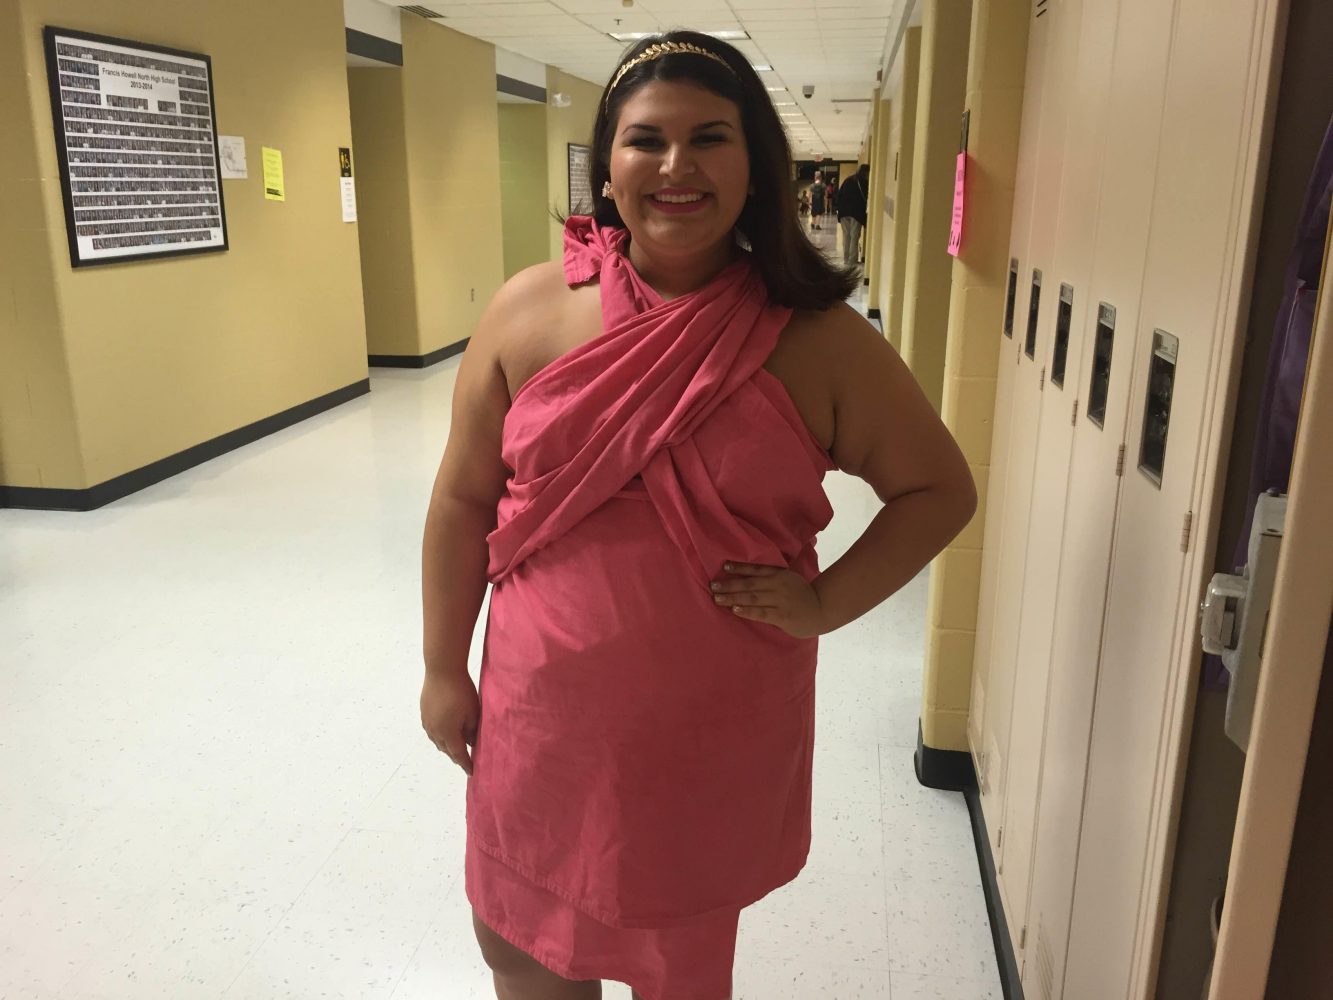 9-15 Black and Gold Day/Toga Day [Photo Gallery]